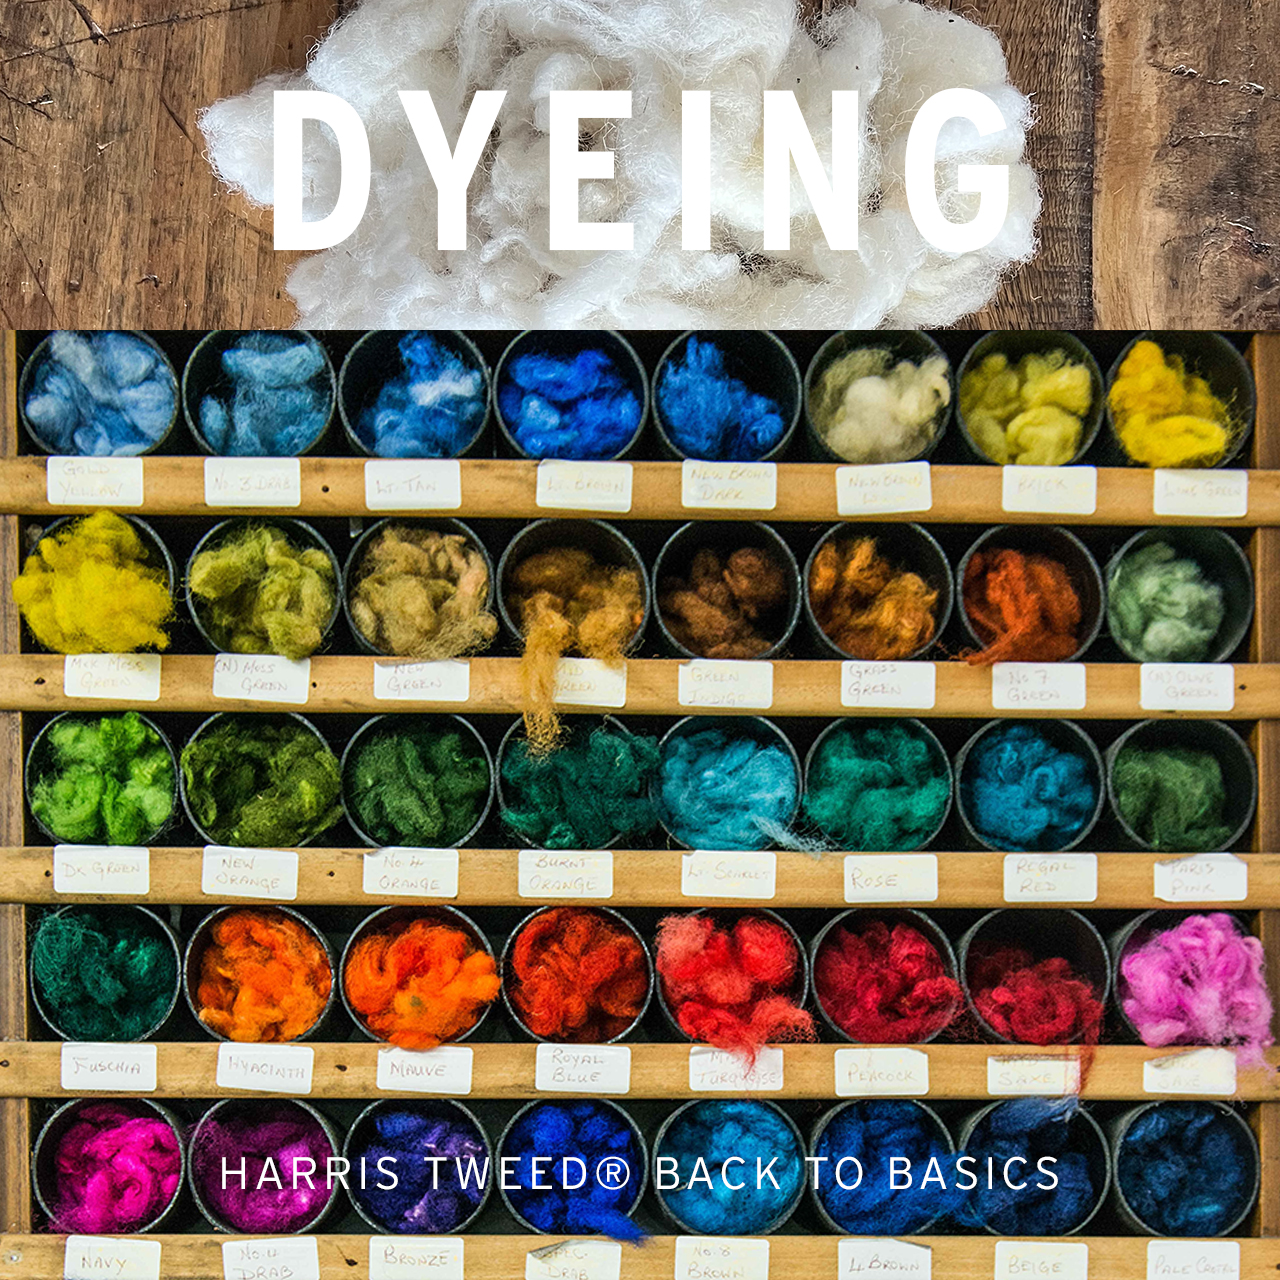 Back to basics series - day 3 - Dyeing 2